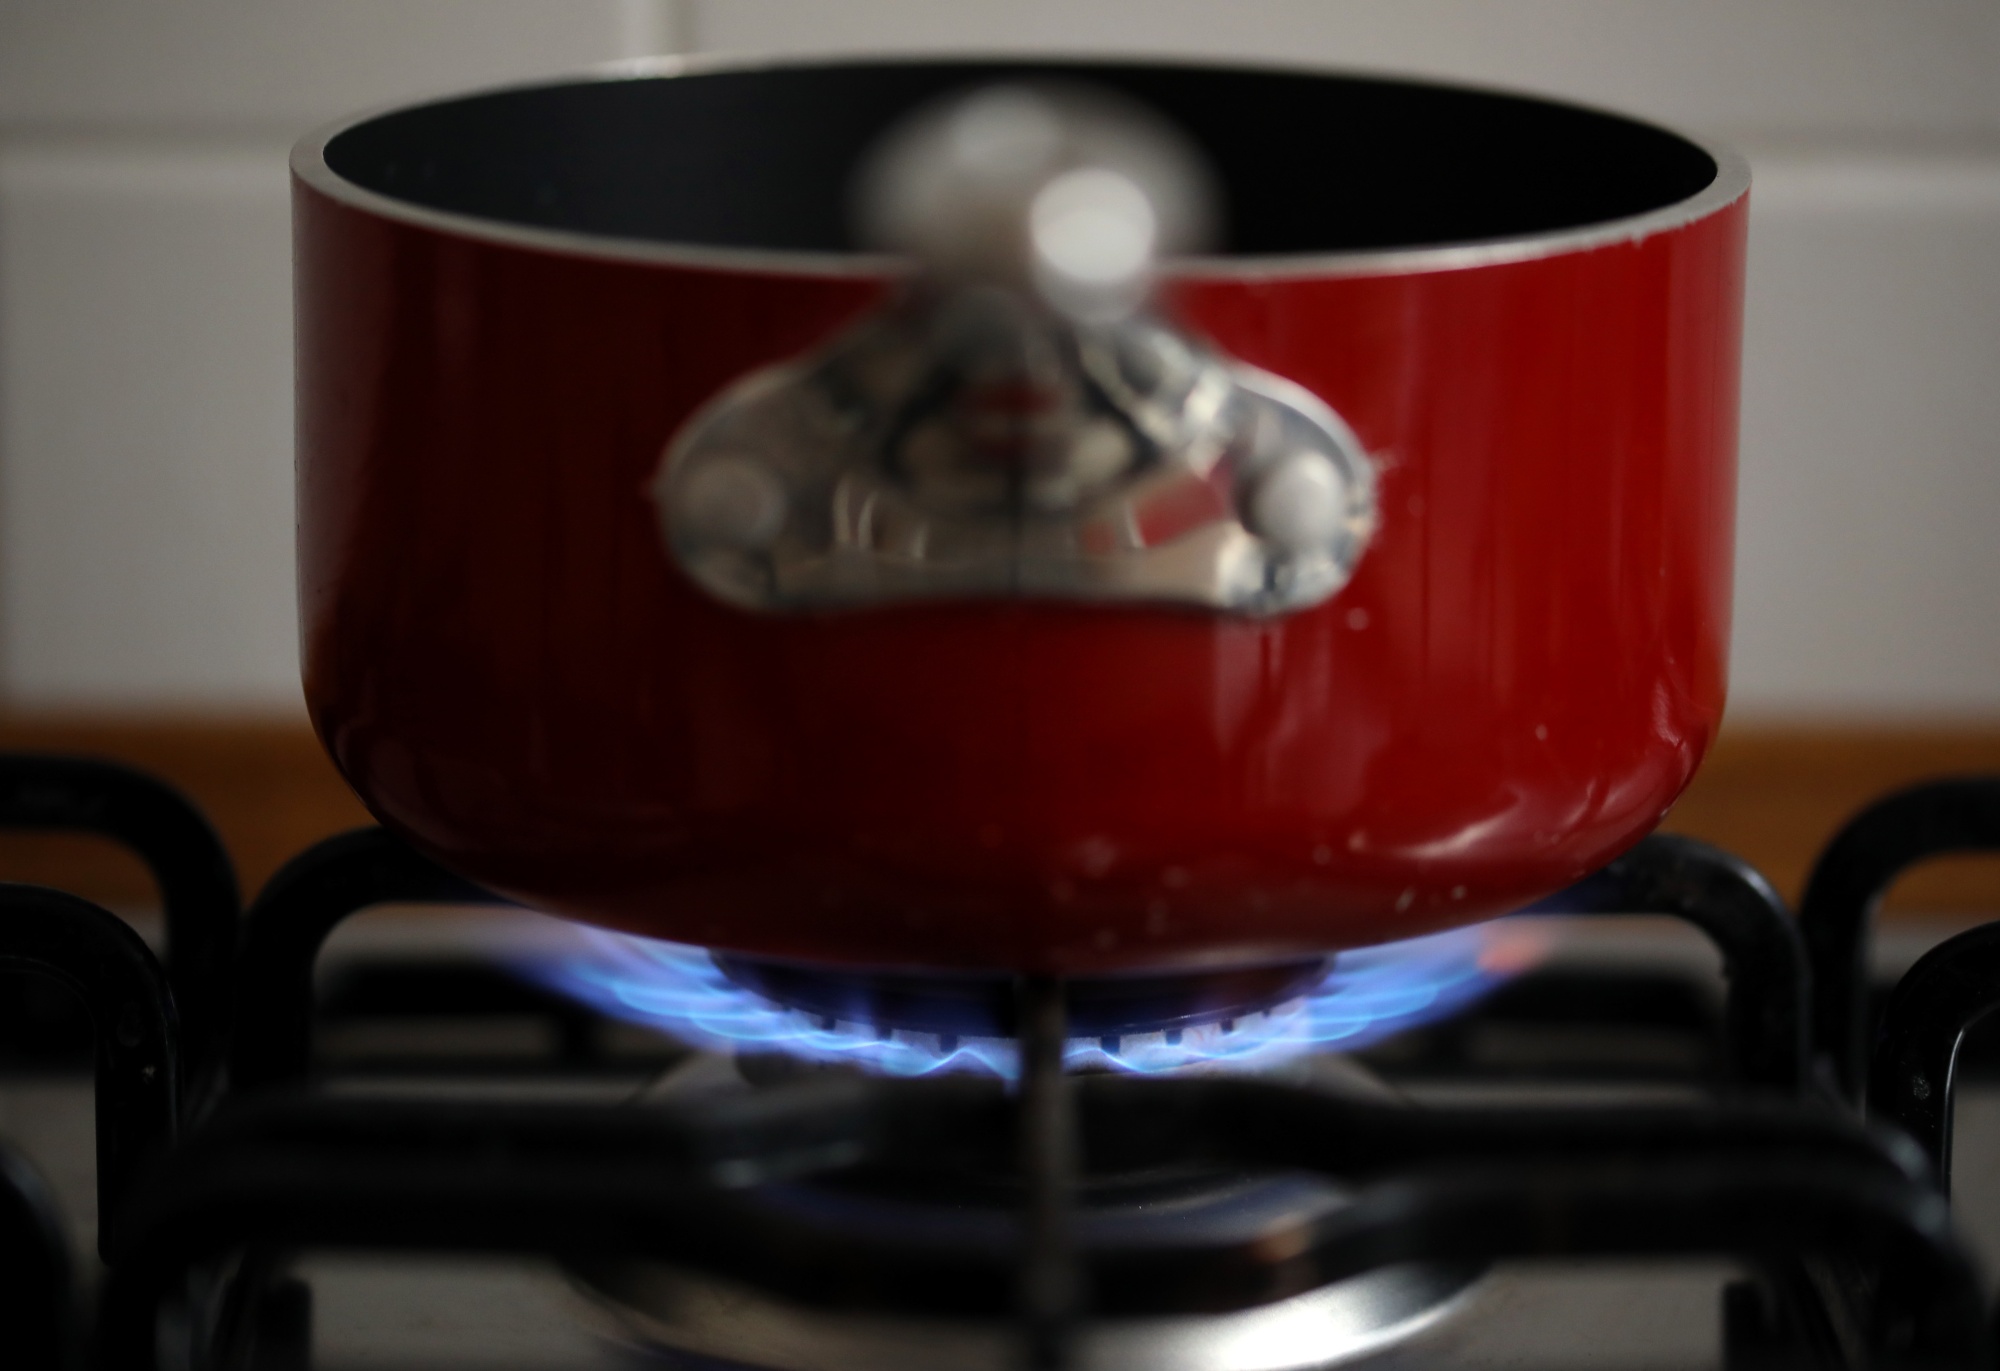 After seeing how gas stoves pollute homes, these researchers are